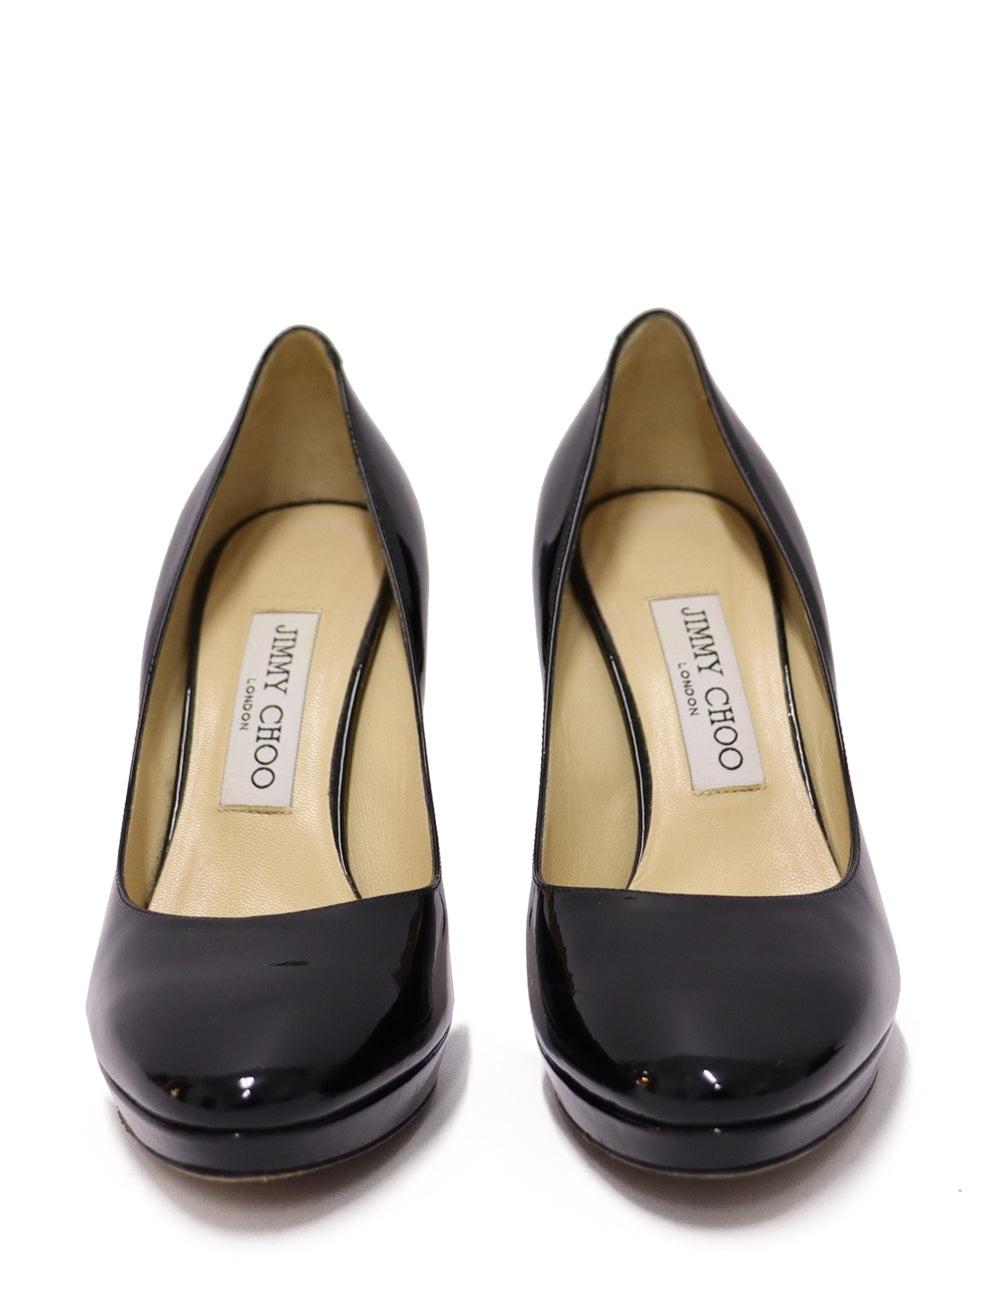 Jimmy Choo EU 37.5 Black Patent Leather Platform Pumps with Heel In Good Condition For Sale In Amman, JO